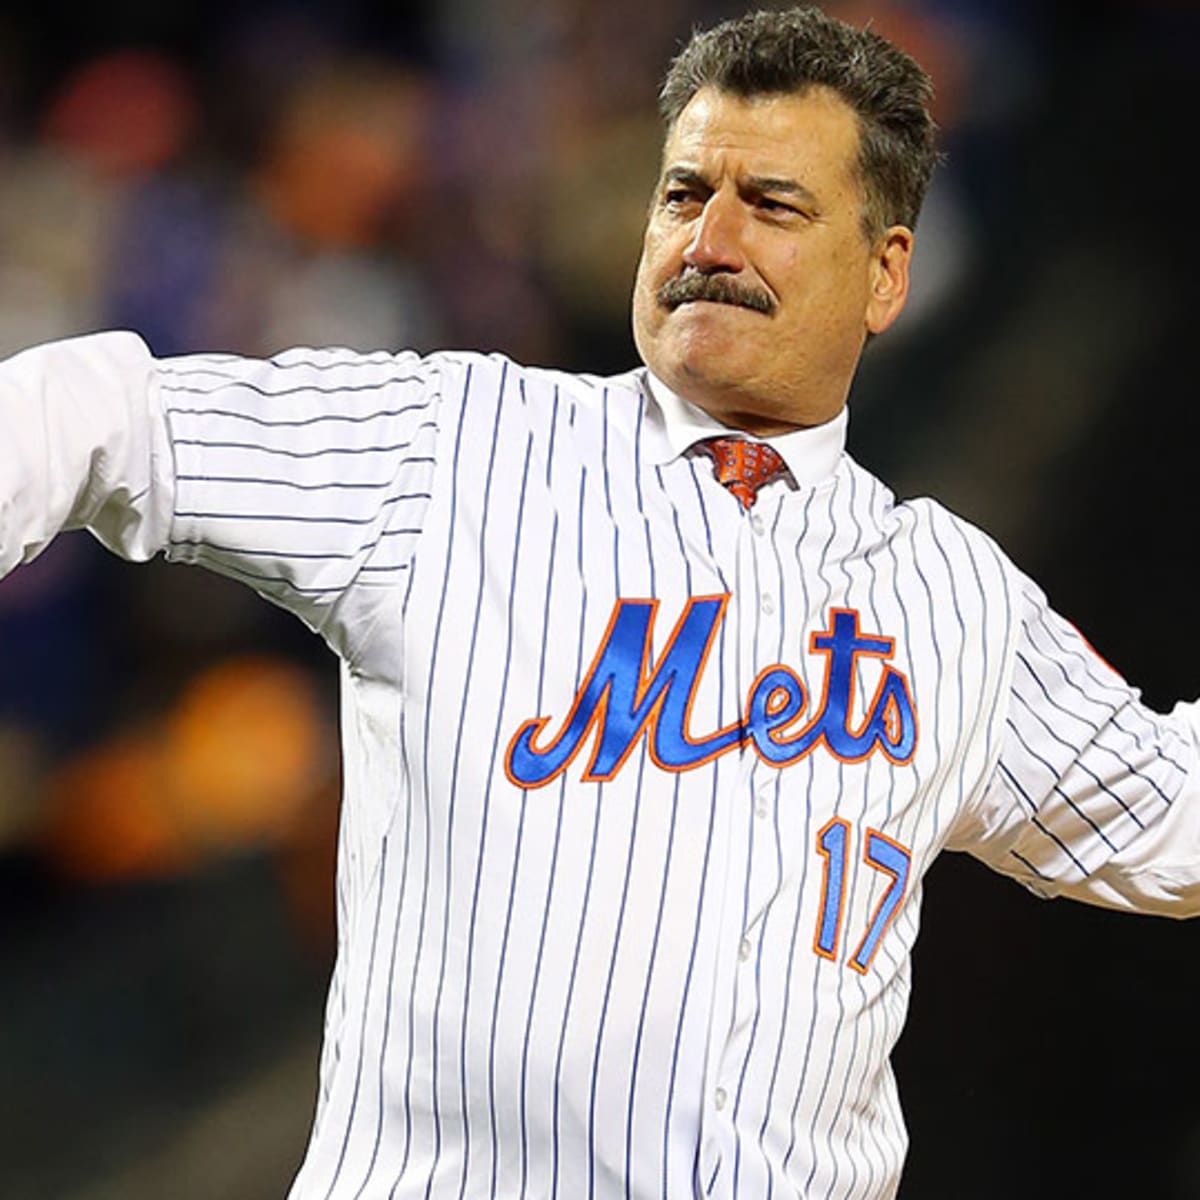 Top 10 Mets Numbers That Are Most Worthy of Being Retired